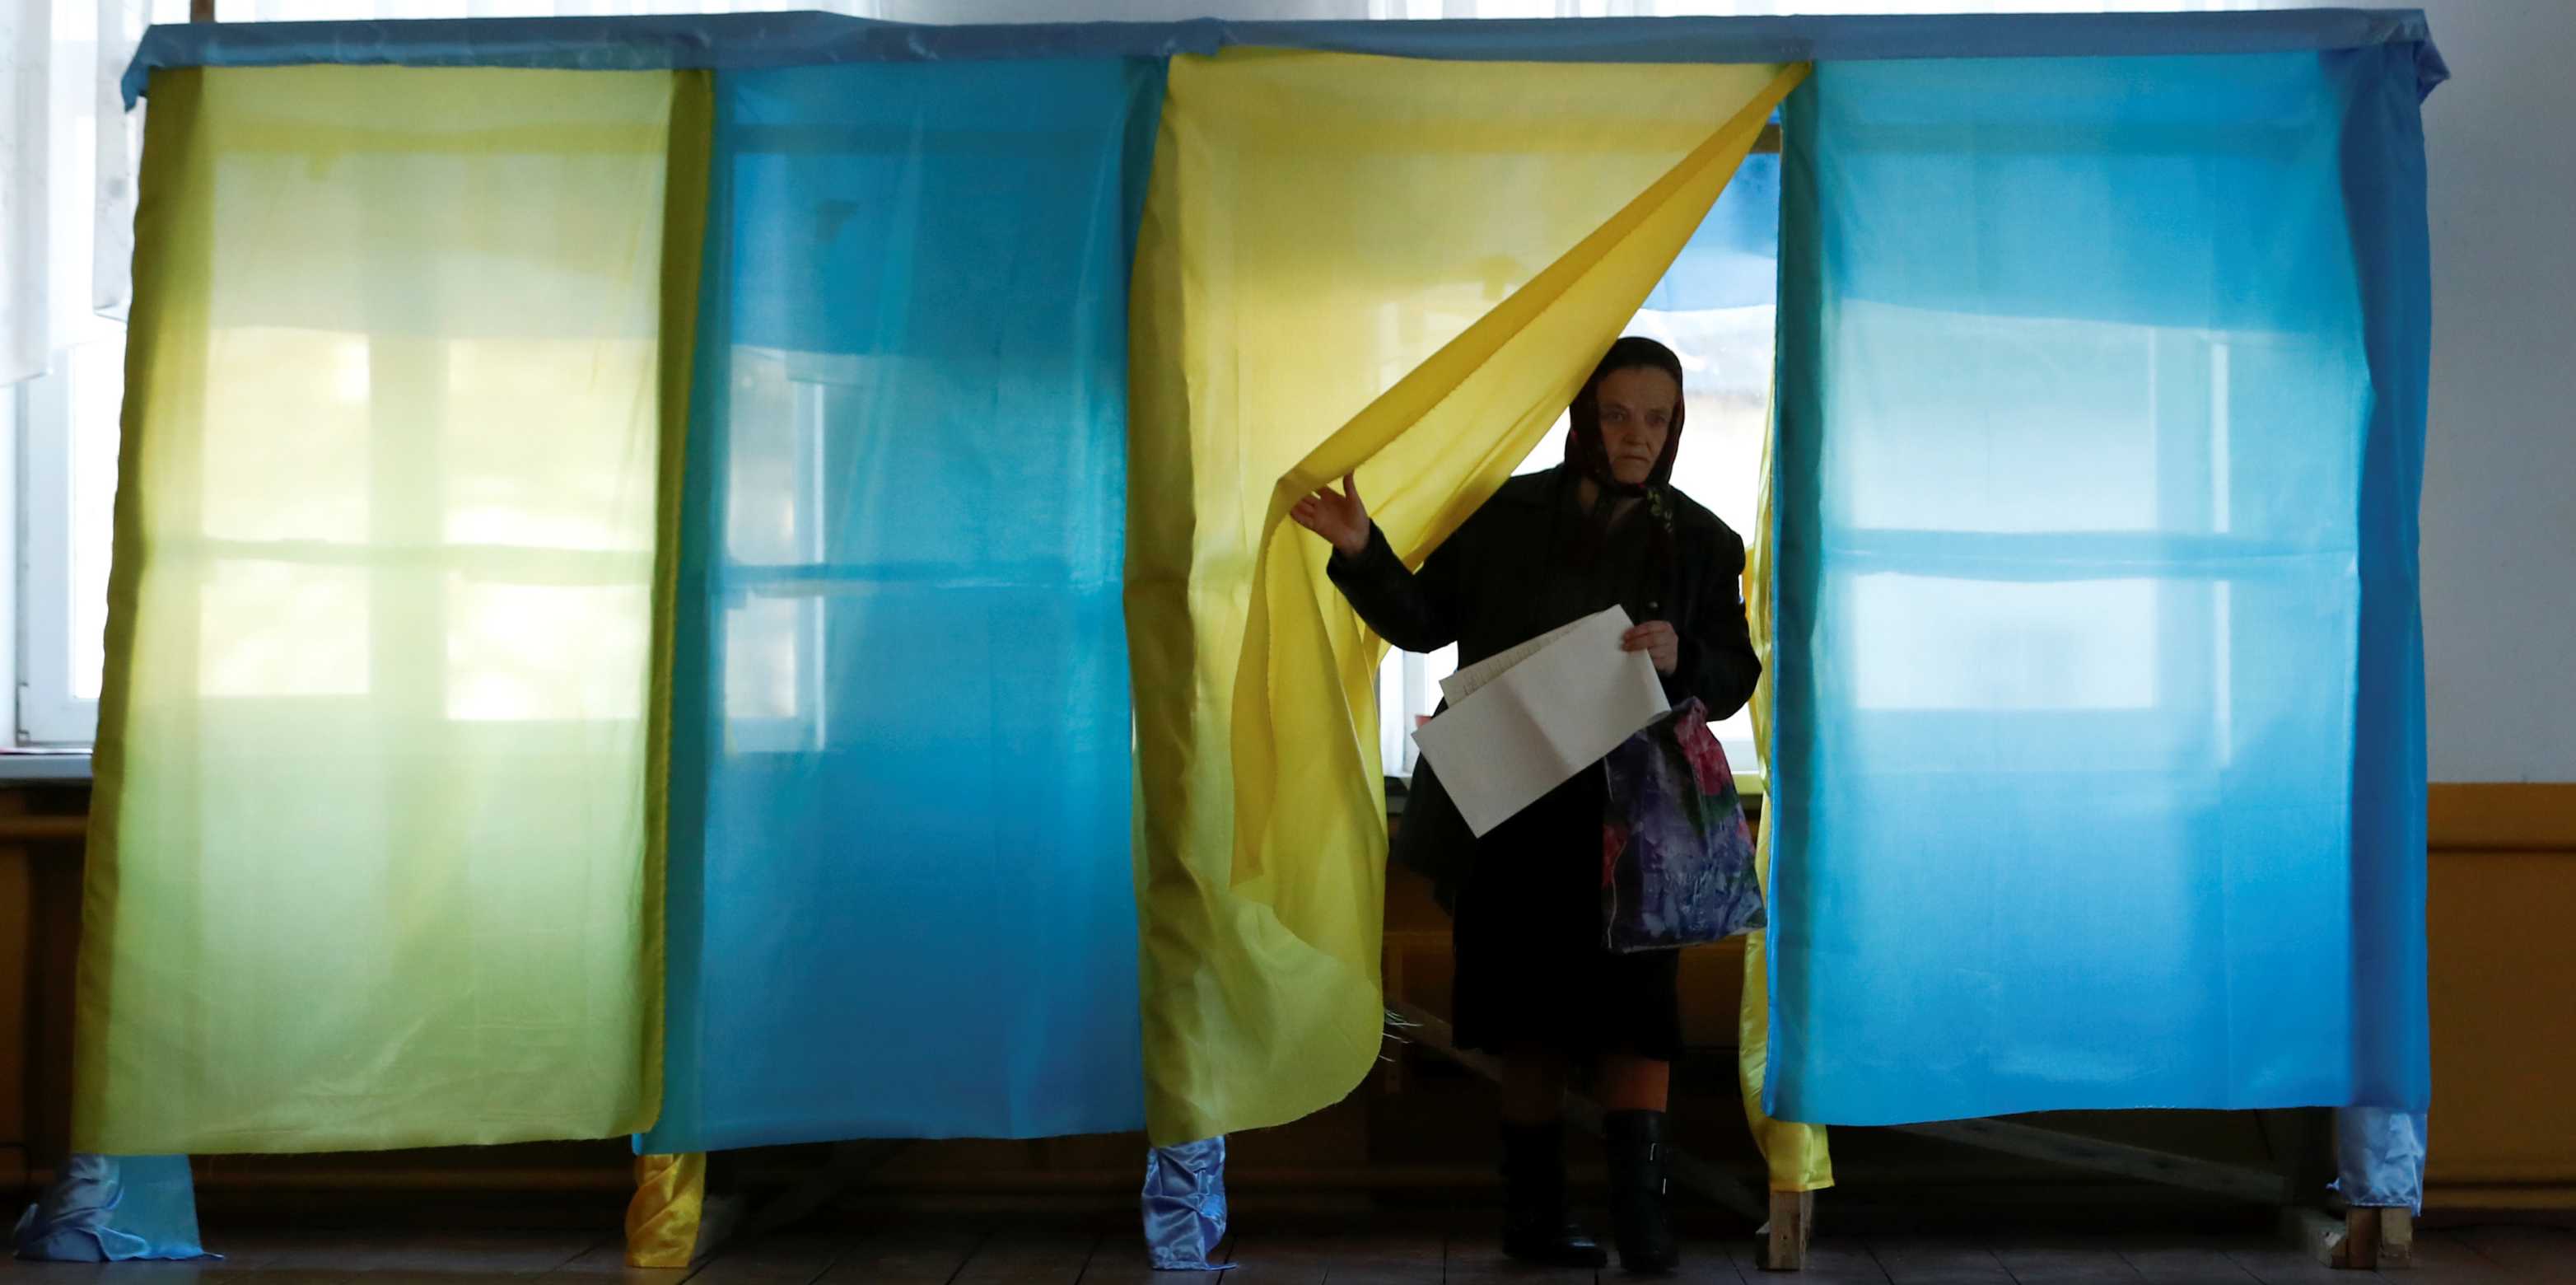 A woman at a polling station during a presidential election in the village of Kosmach, Ukraine in March 2019